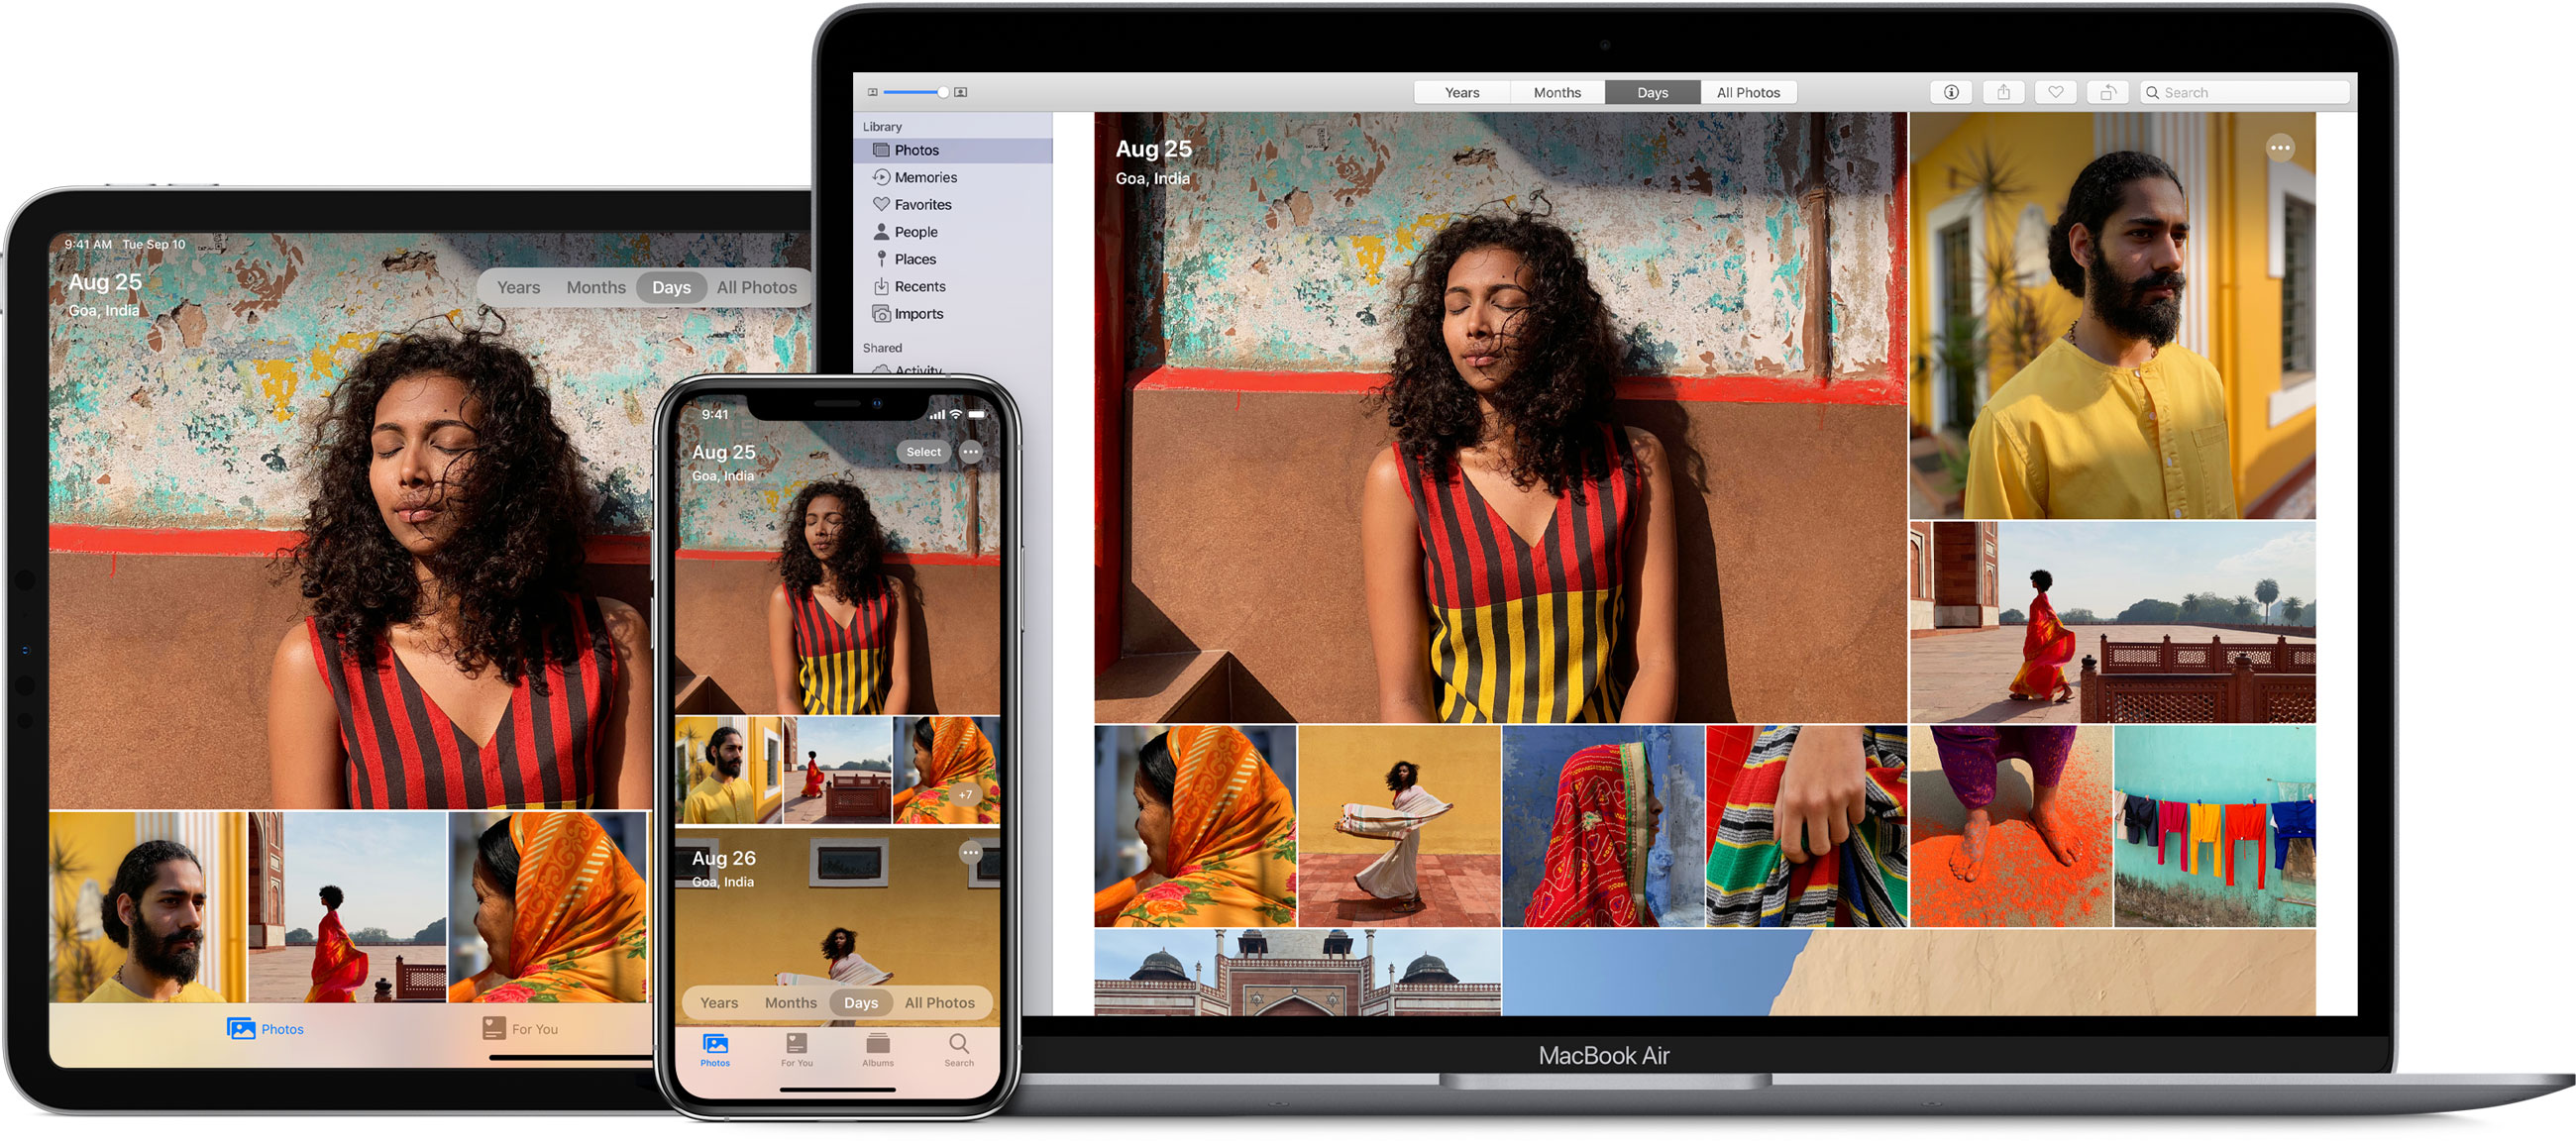 download photos from iphoto library manager